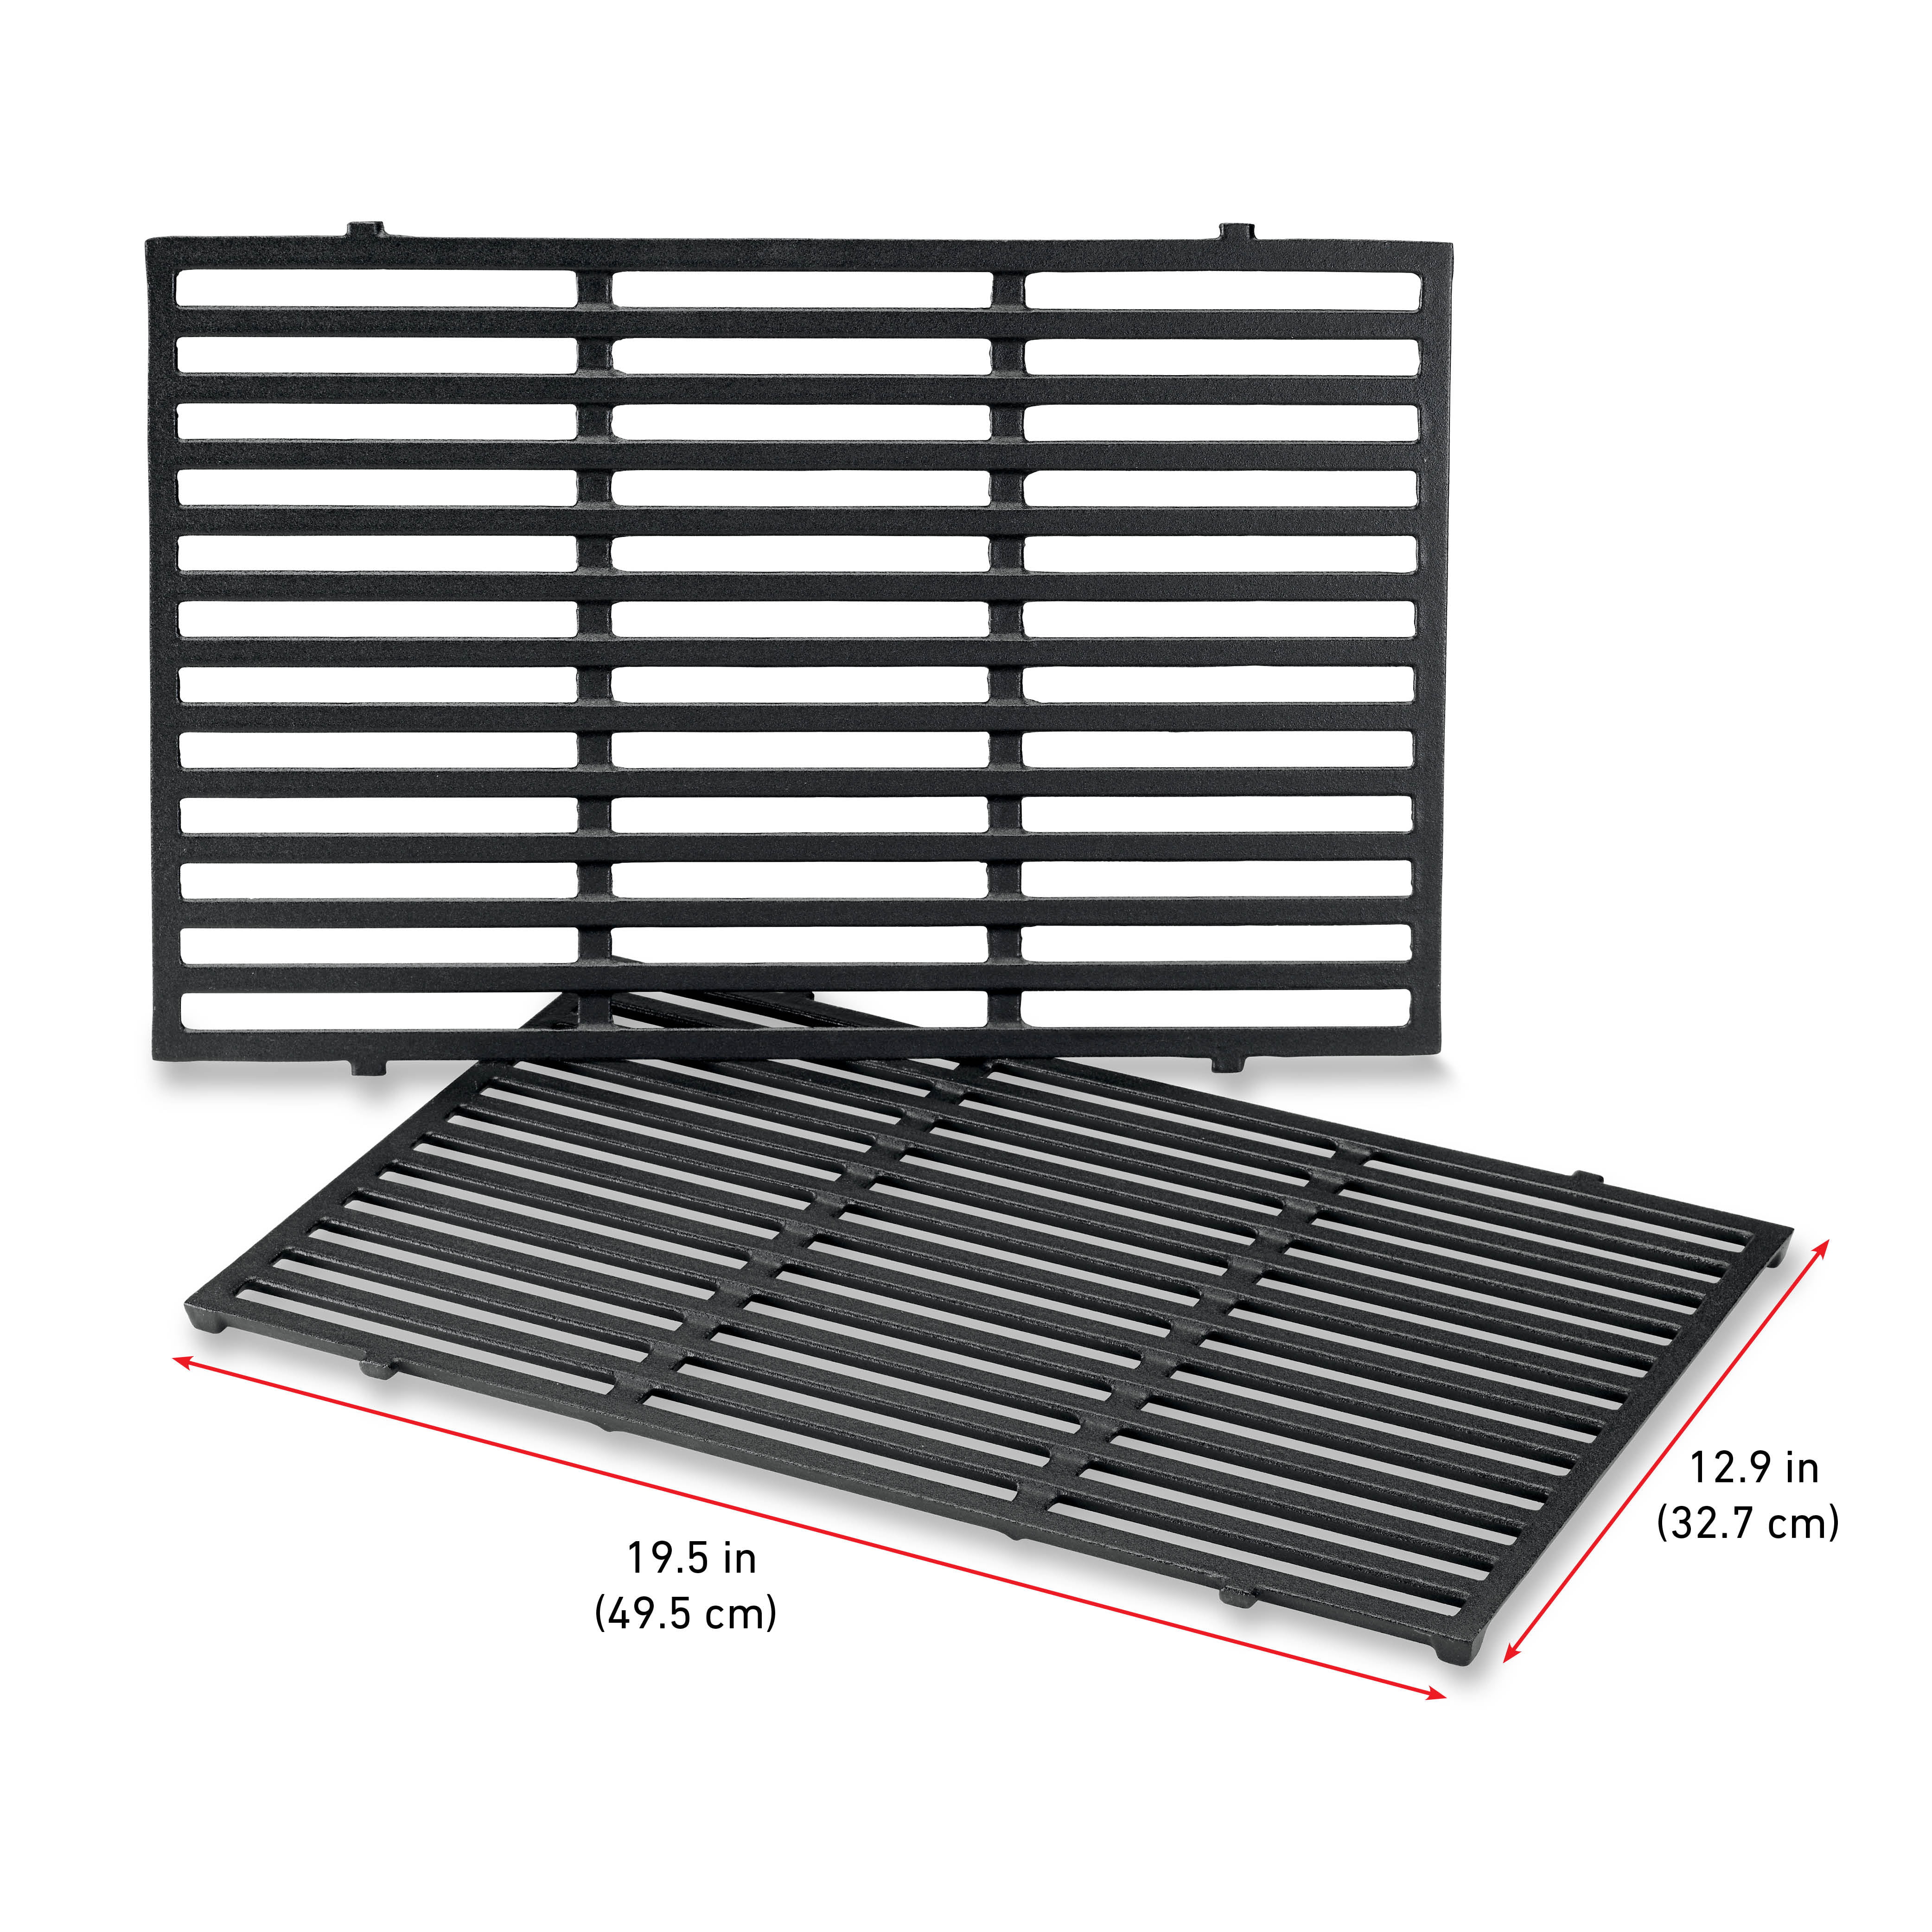 Details about   Cooking Grates 2-Pack for Weber Spirit  7522 7523 Genesis Silver A 